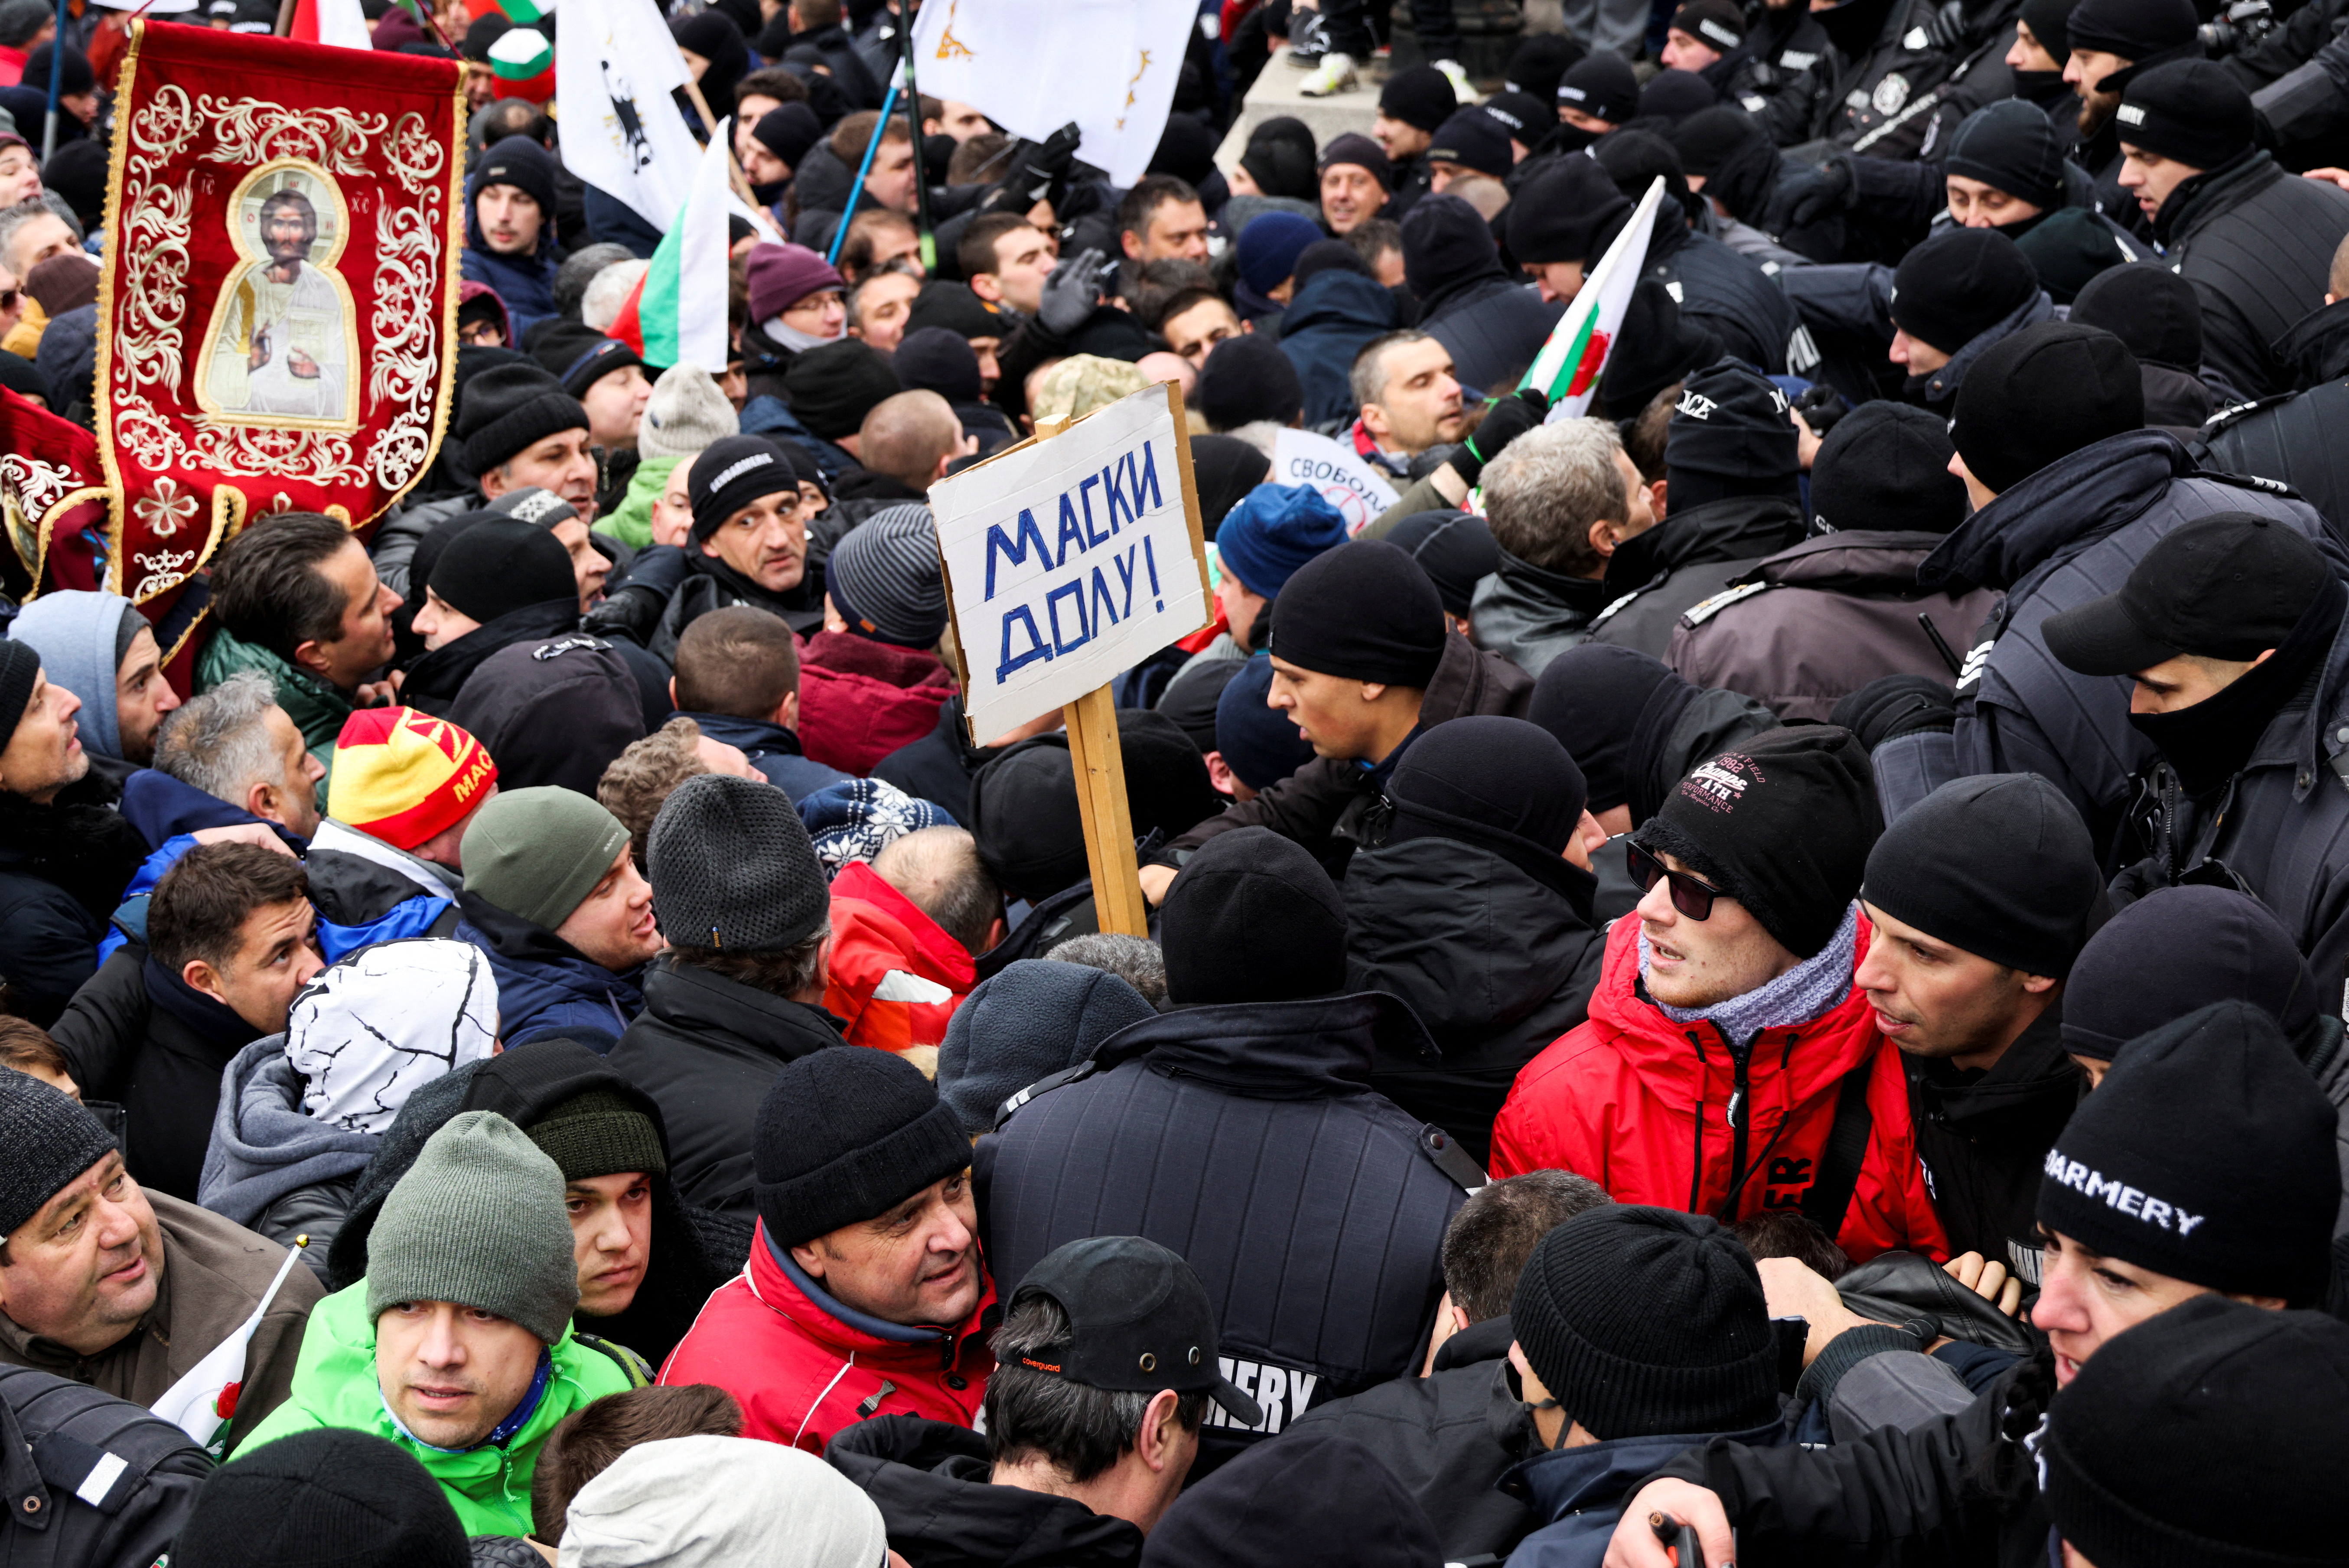 Rally against government measures to curb the spread of COVID-19 in Sofia